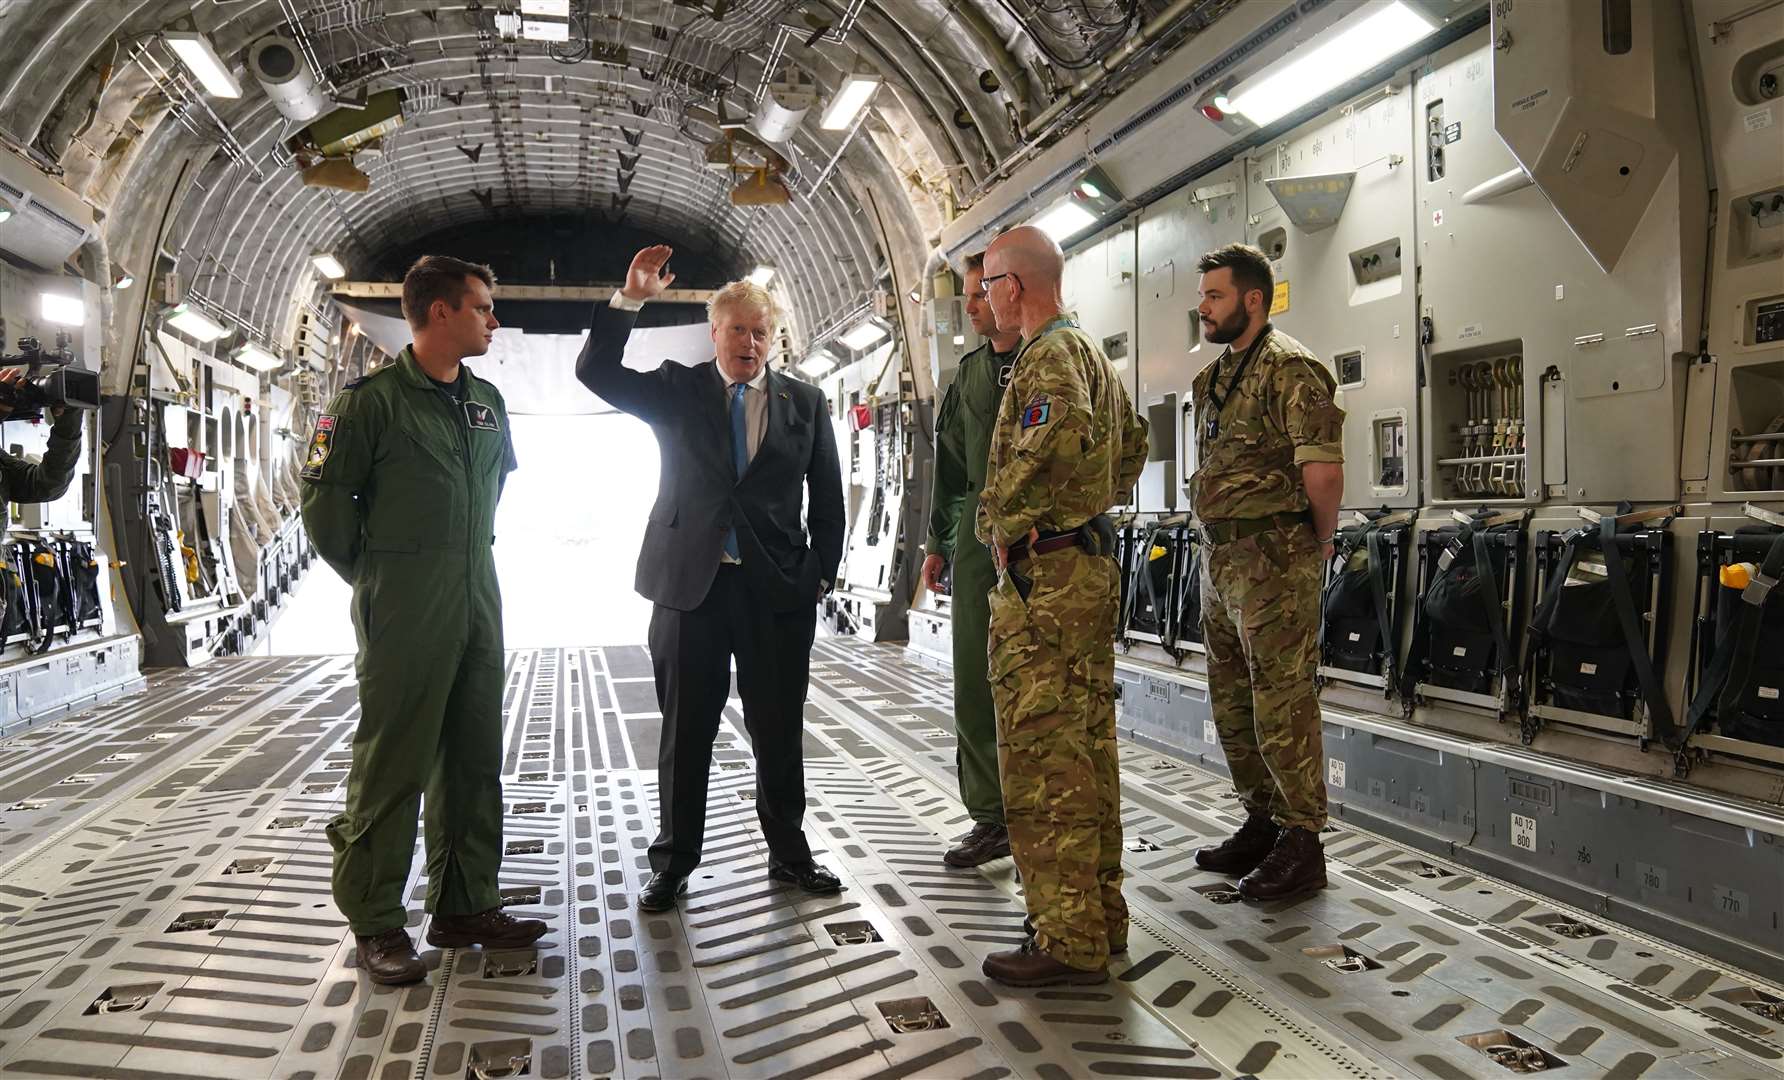 Prime Minister Boris Johnson, speaks with military personnel on board a C17 at RAF Brize Norton in Oxfordshire the day after his visit to Kyiv (Joe Giddens/PA).